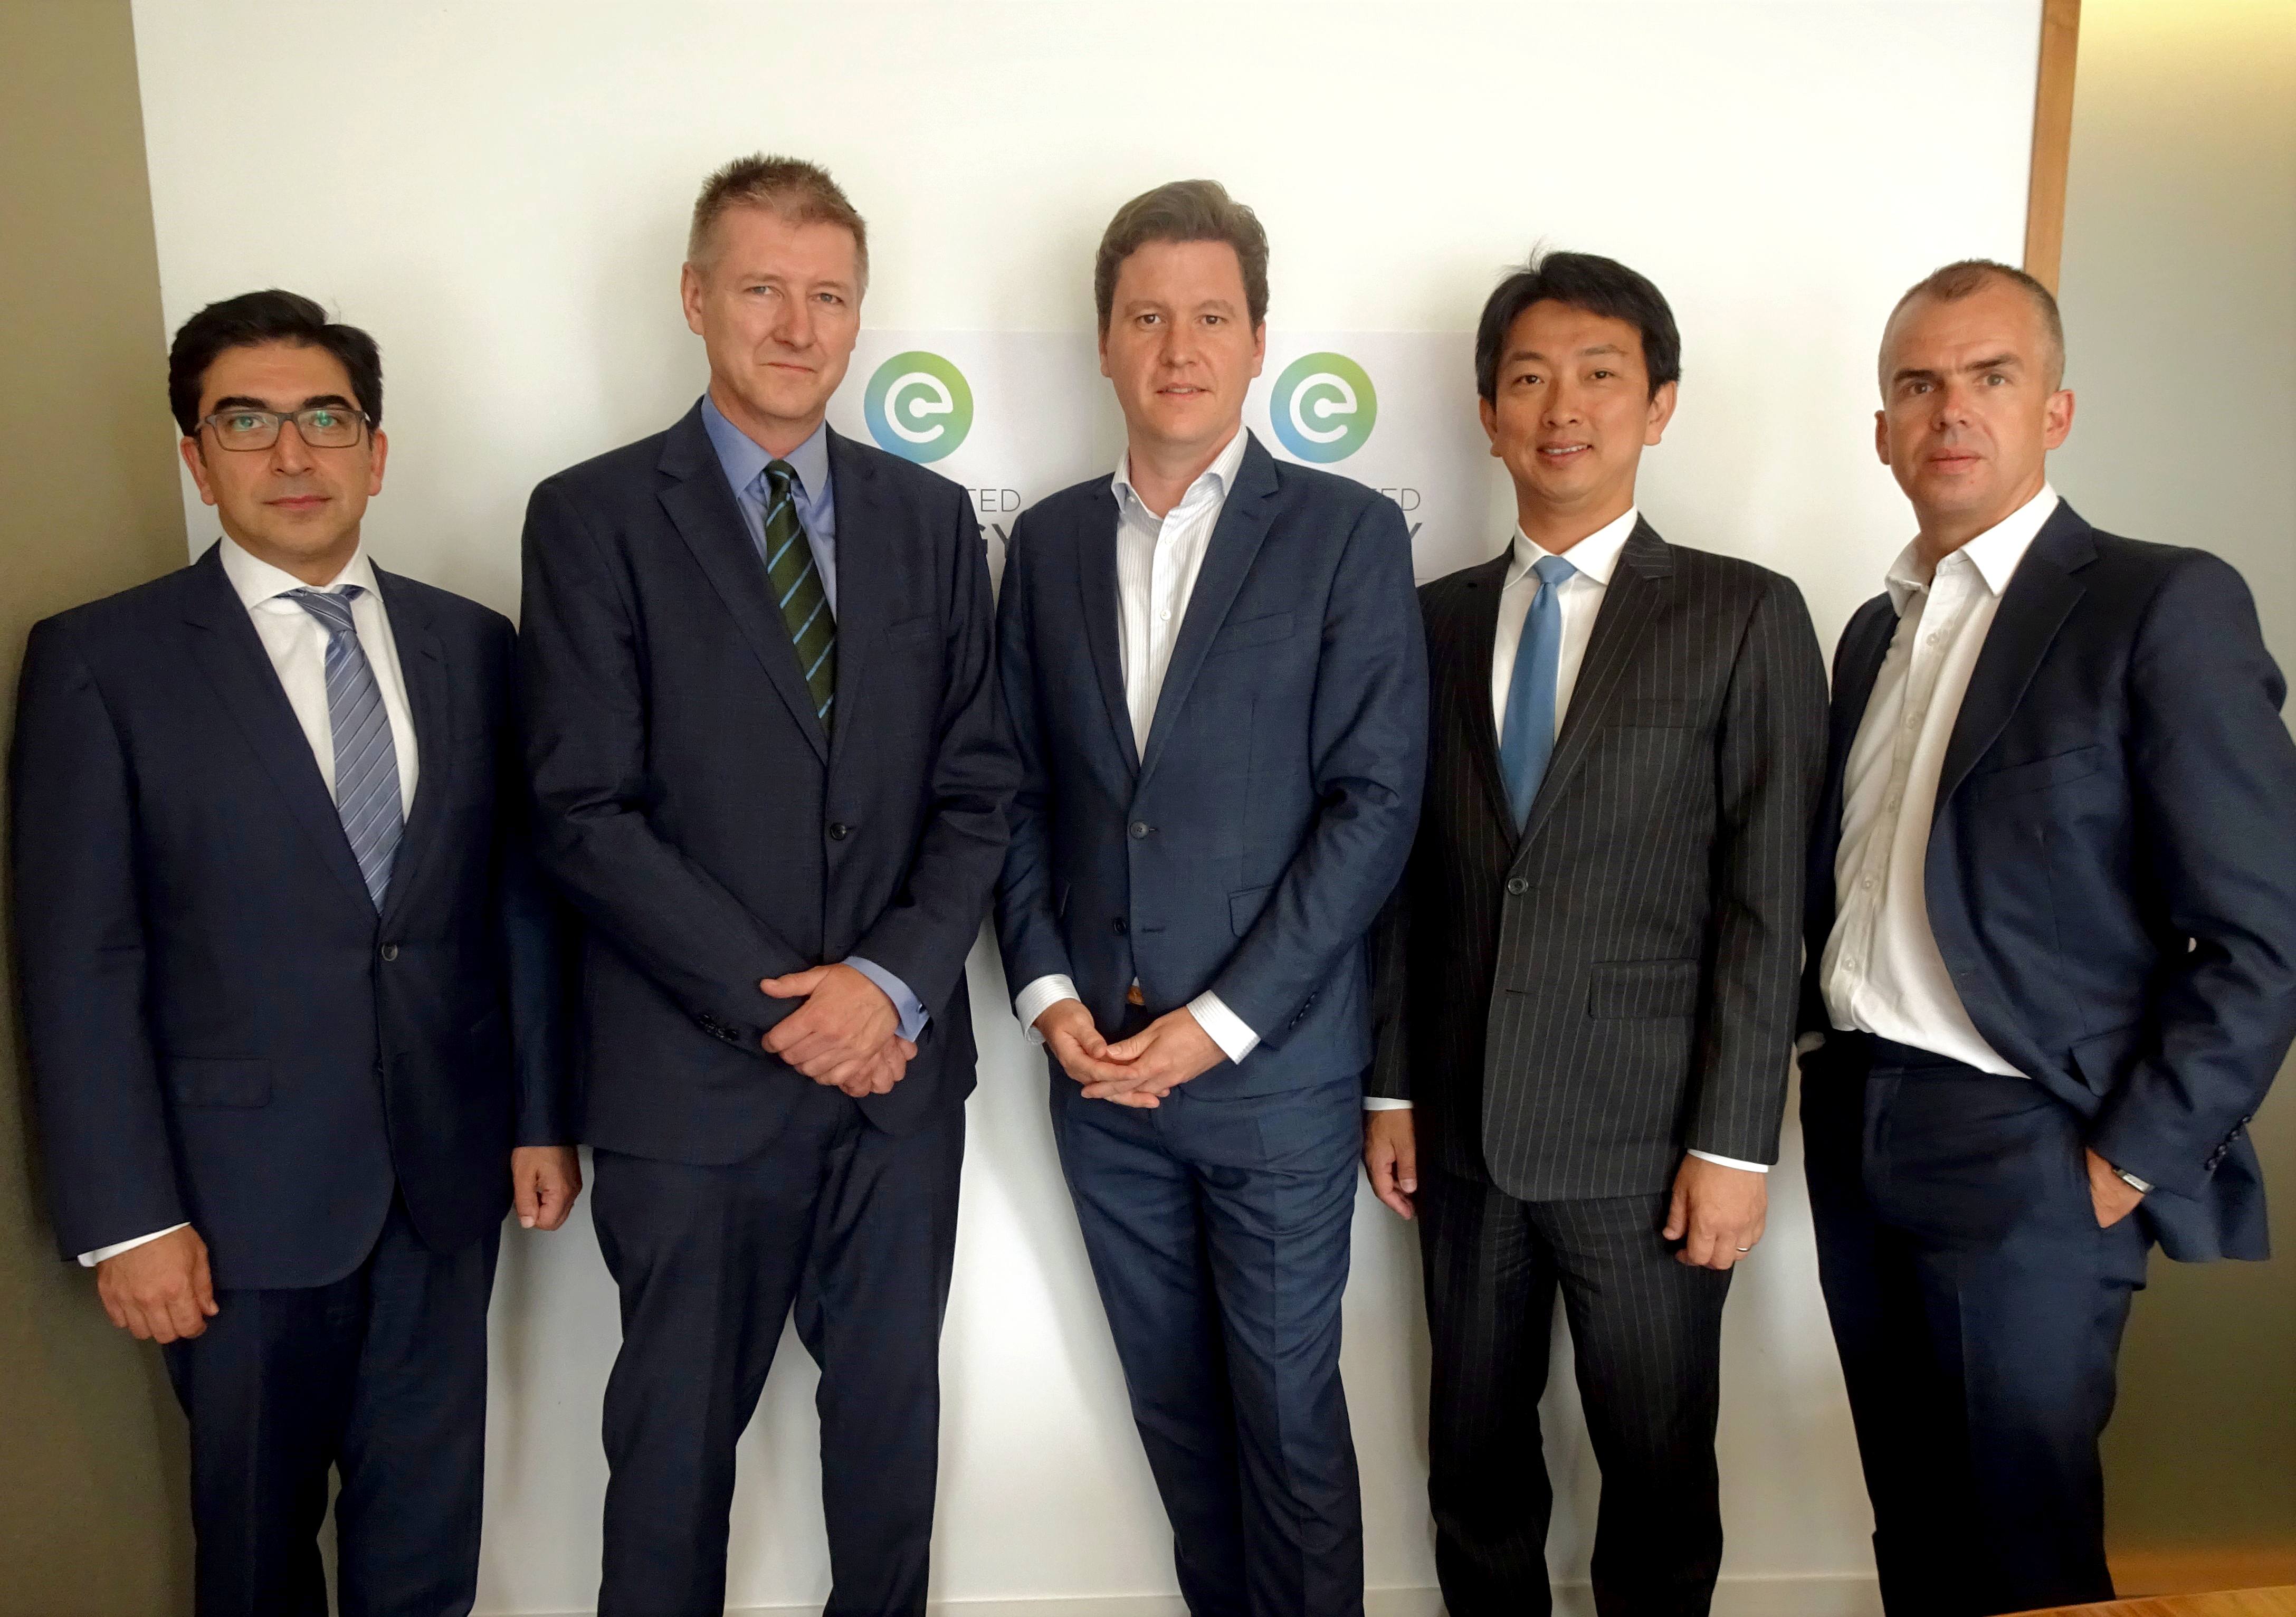 Connected Energy secures multimillion investment from Sumitomo, ENGIE and Macquarie